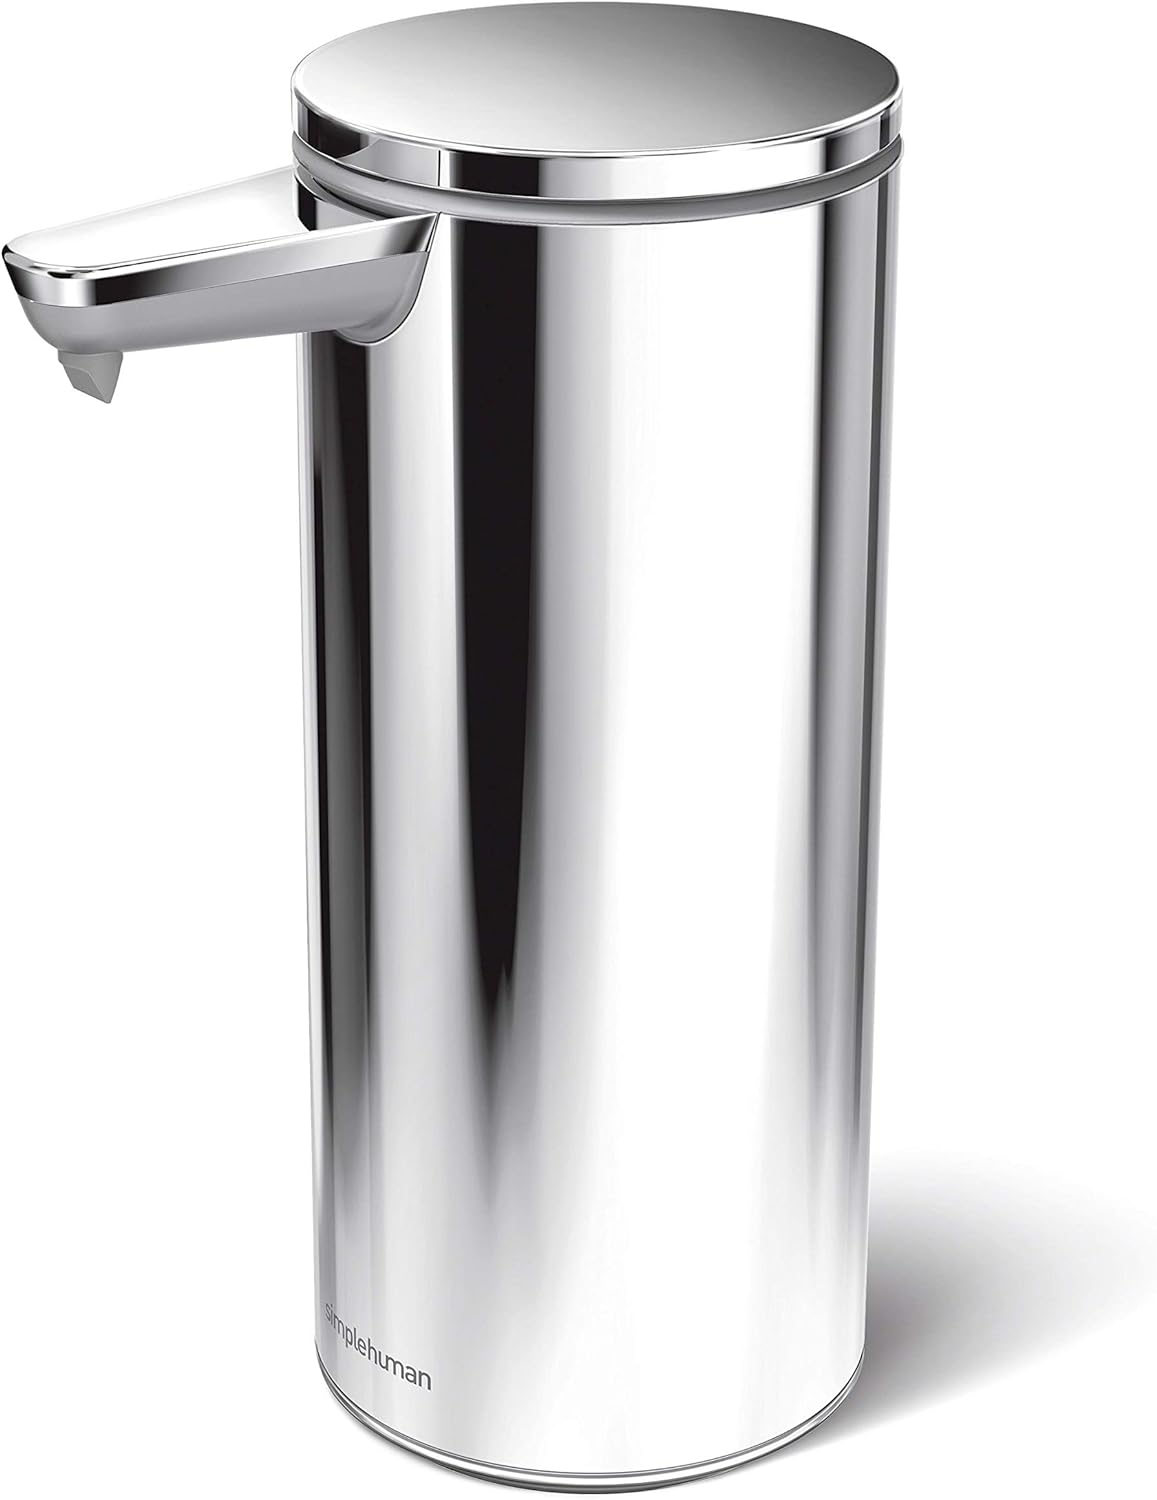 simplehuman 9 oz. Touch-Free Rechargeable Sensor Liquid Soap Pump Dispenser, Polished Stainless Steel